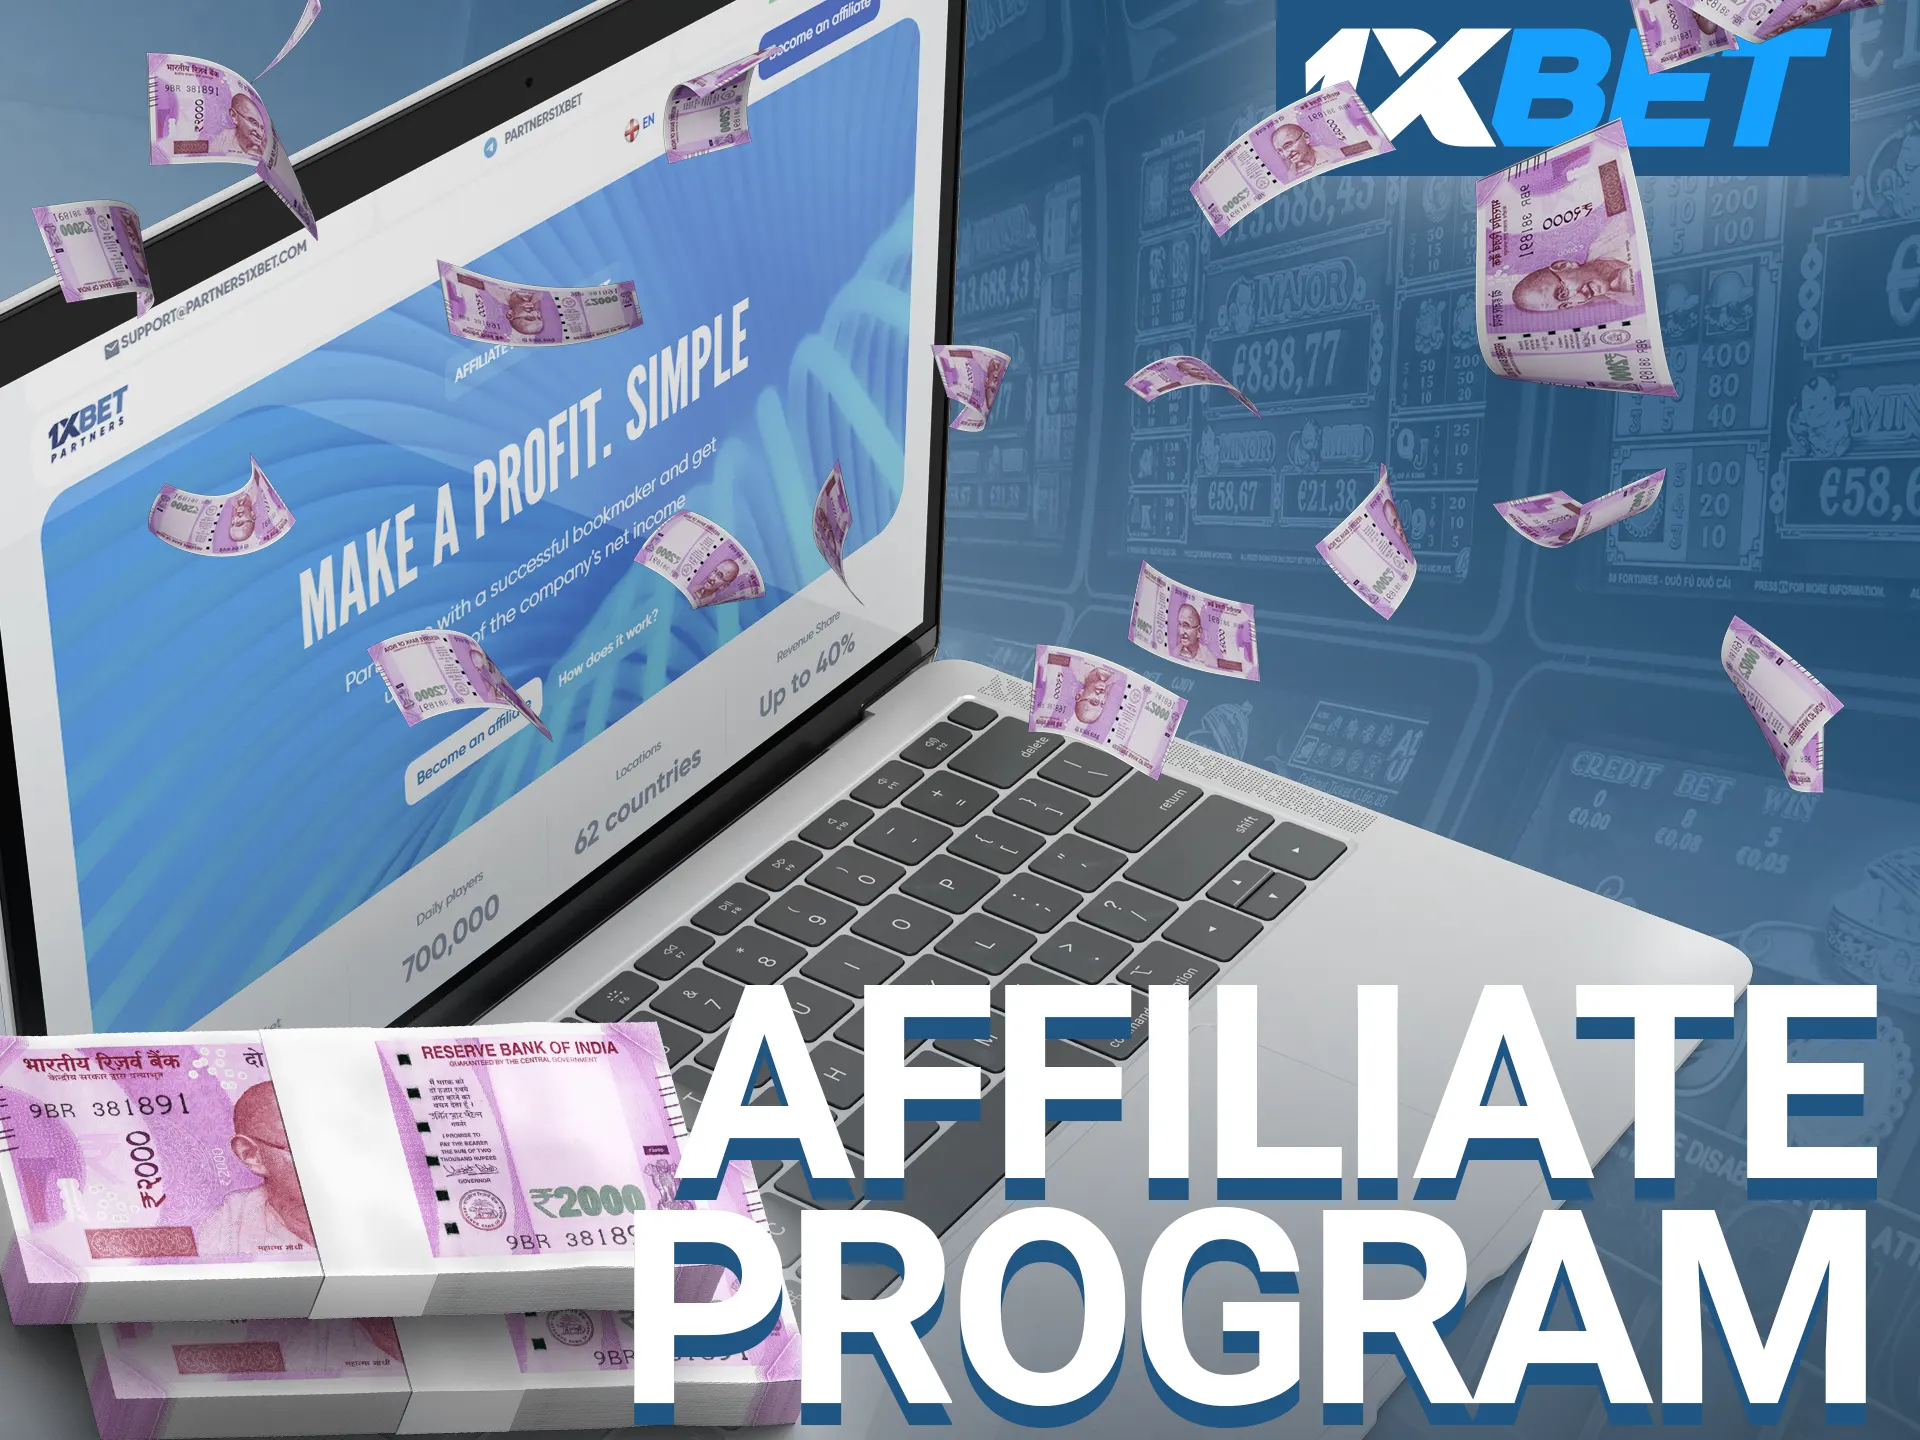 Join the 1xbet affiliate program.